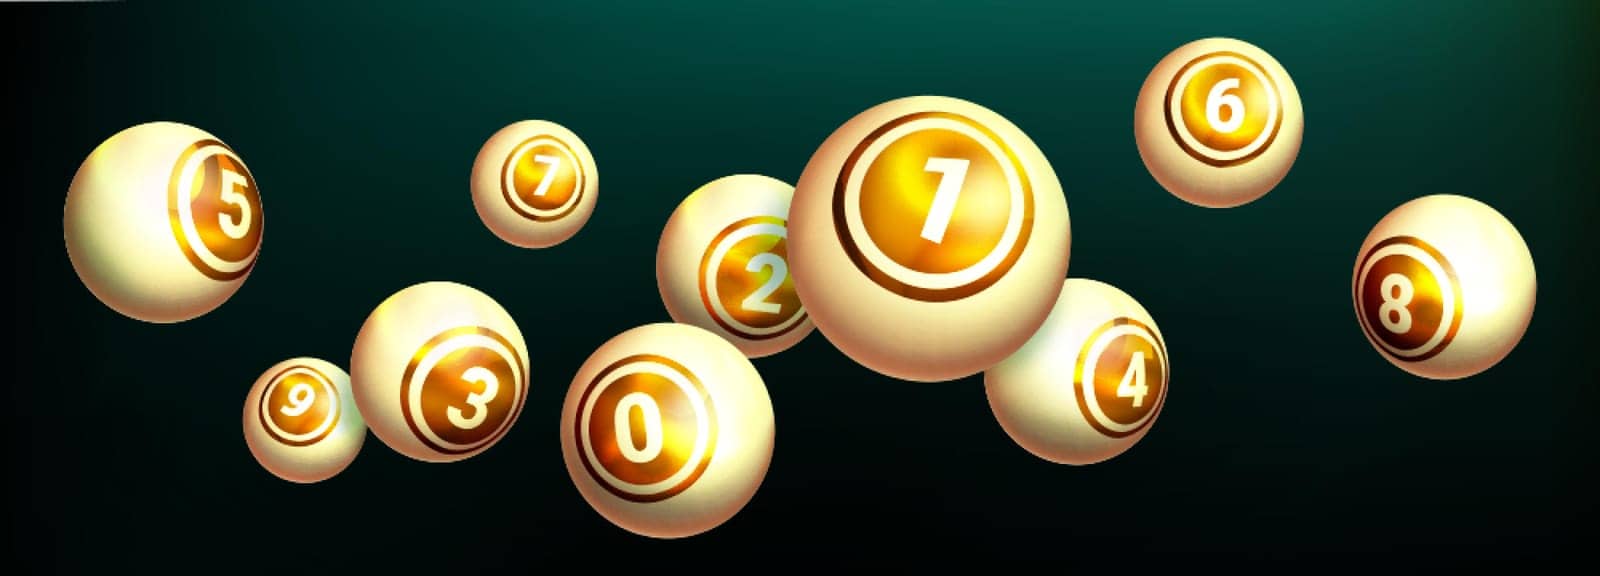 Realistic golden lottery ball on dark background. Gold balls with numbers of winning combination for gambling game. Collection glossy spheres for lotto, kenny and bingo.